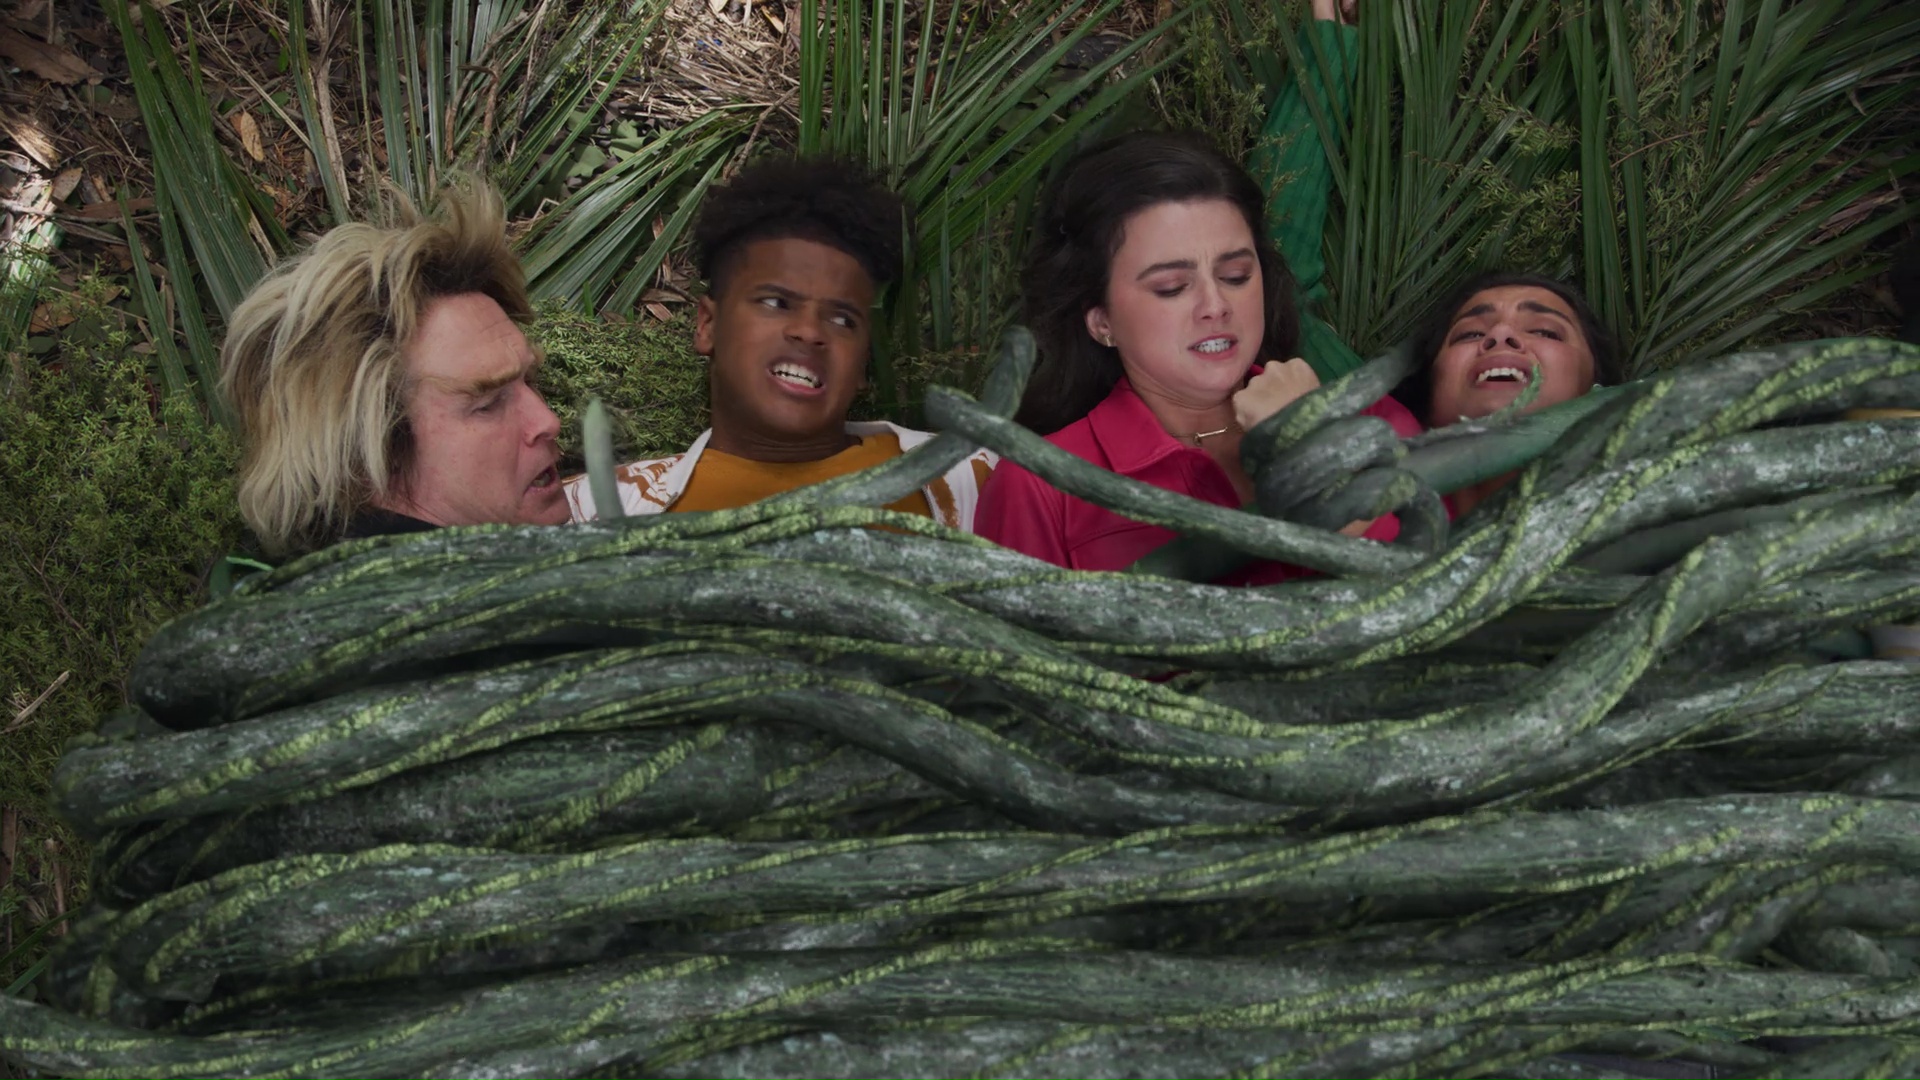 Recap: Power Rangers Cosmic Fury, Episode 4 – “You are the nicest forest I ever met.”